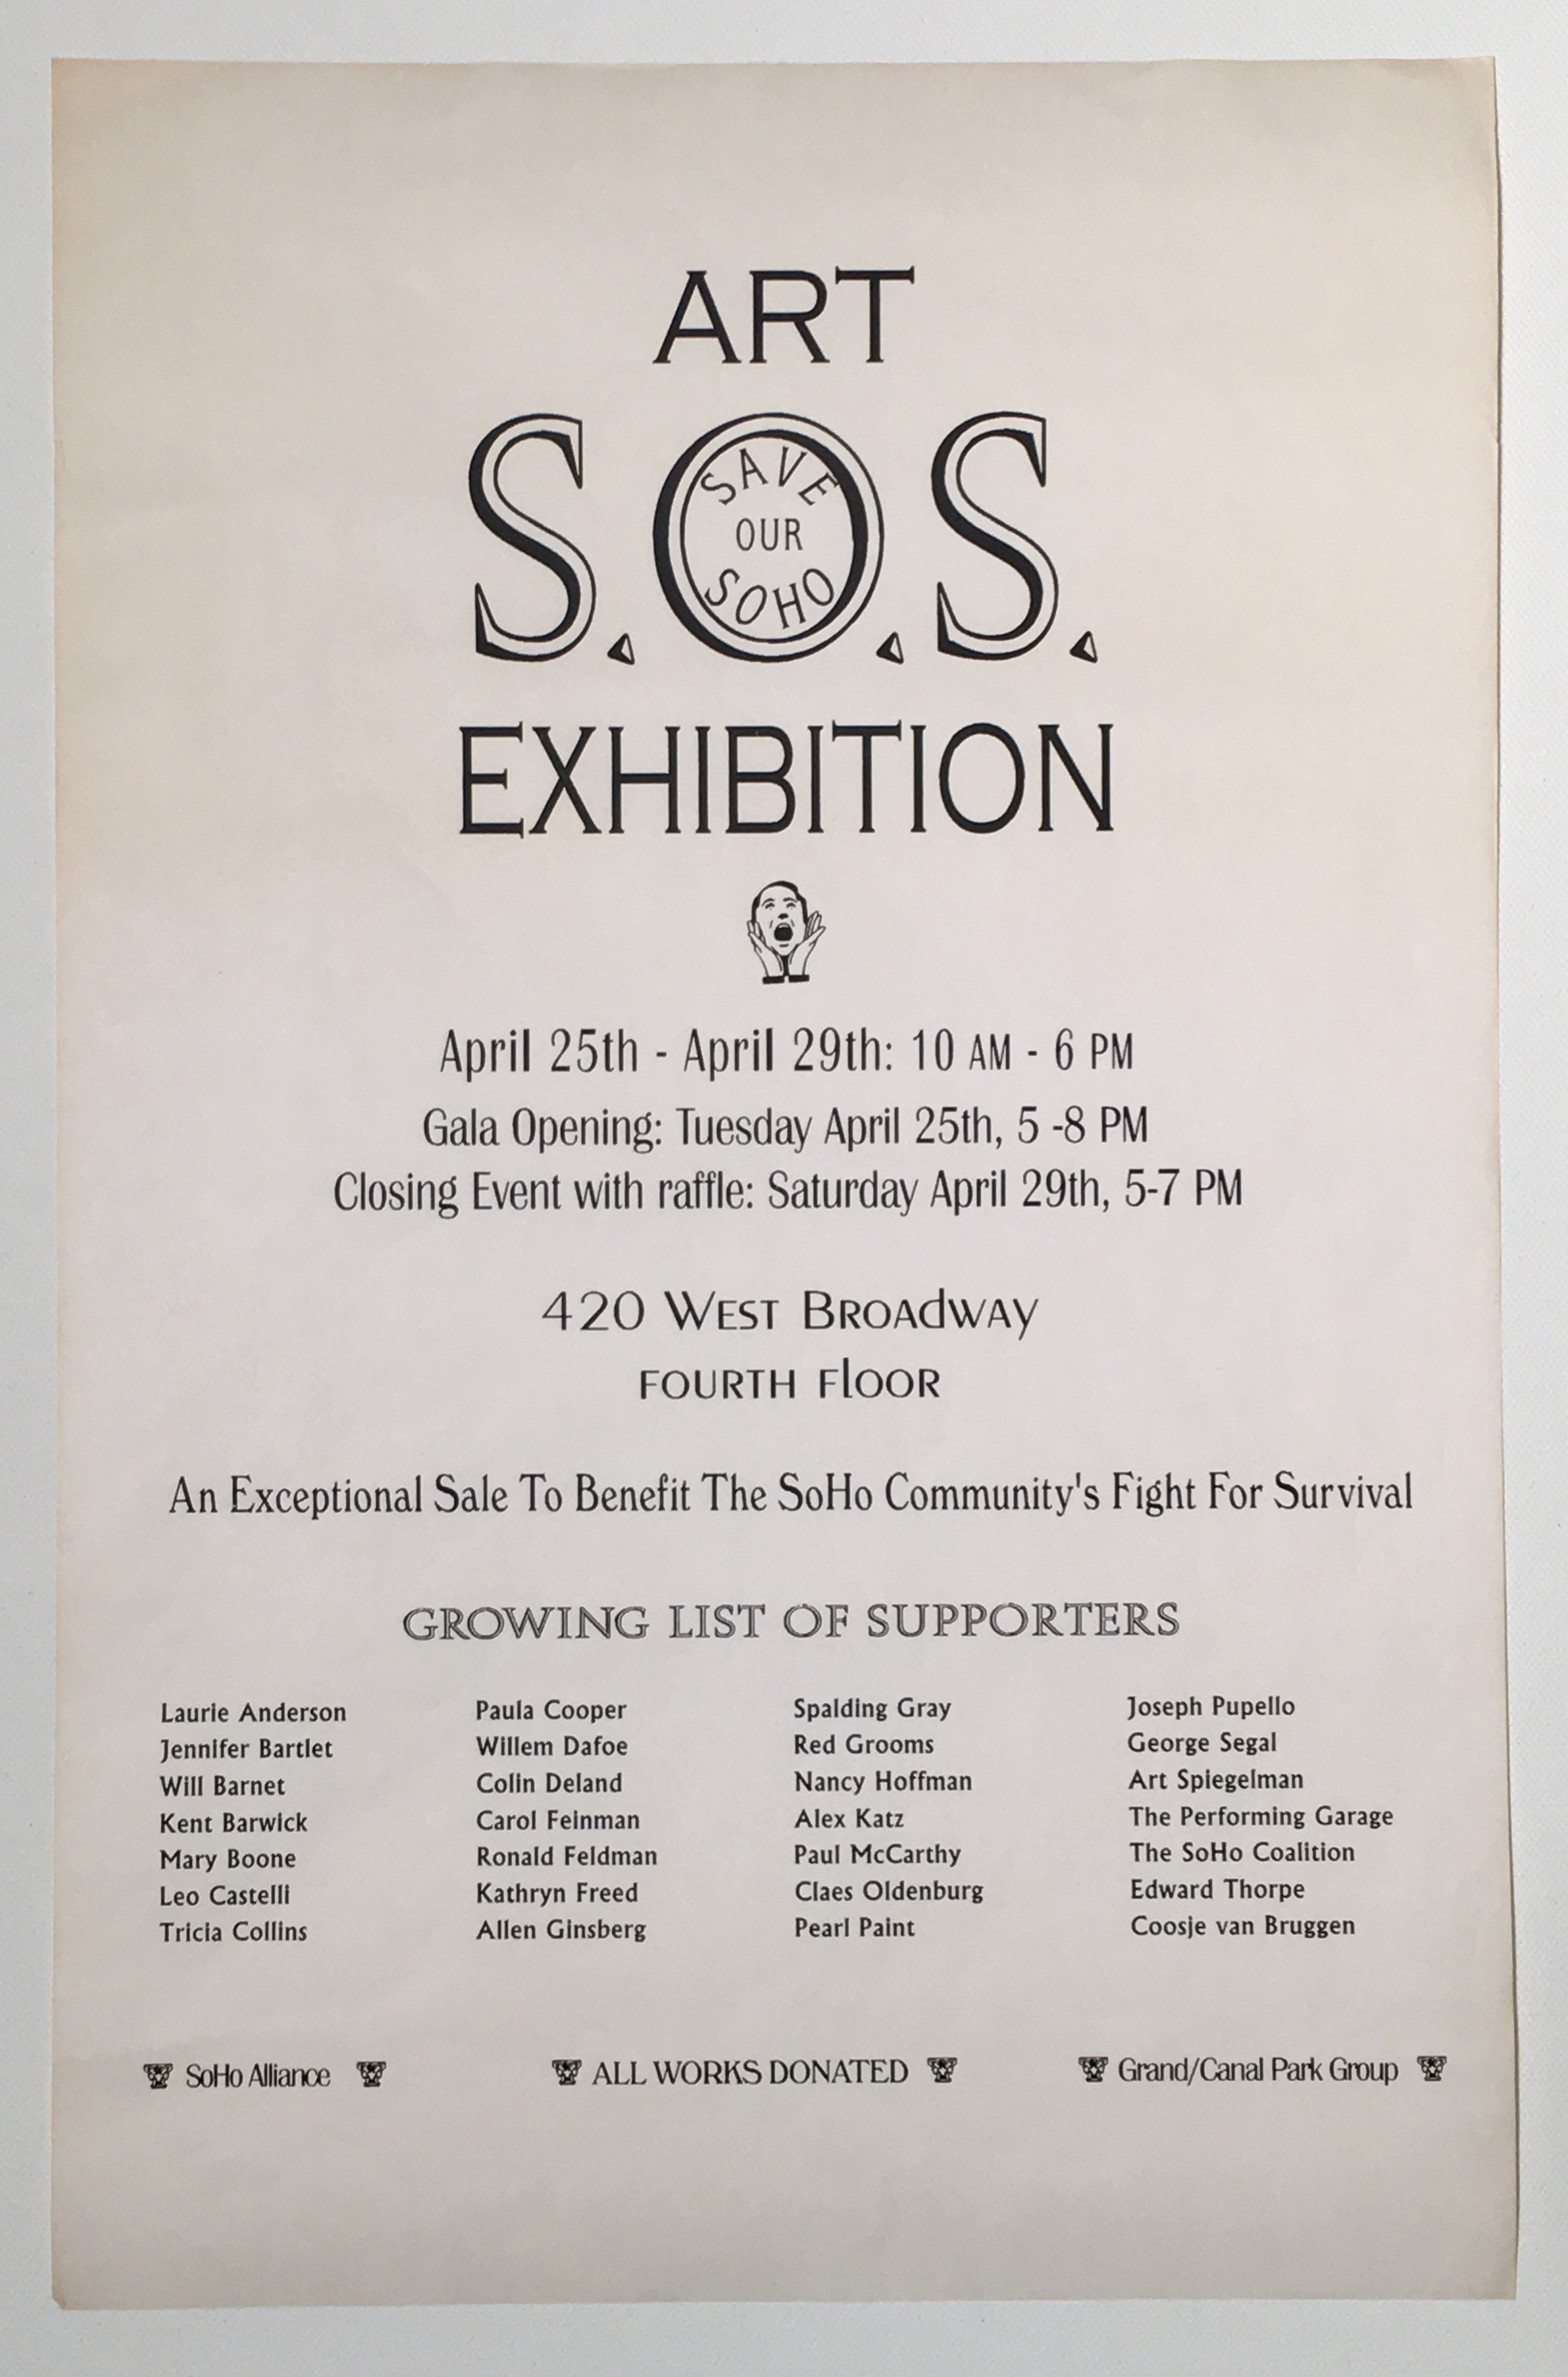 A poster from the SOS: Save Our SoHo Exhibition